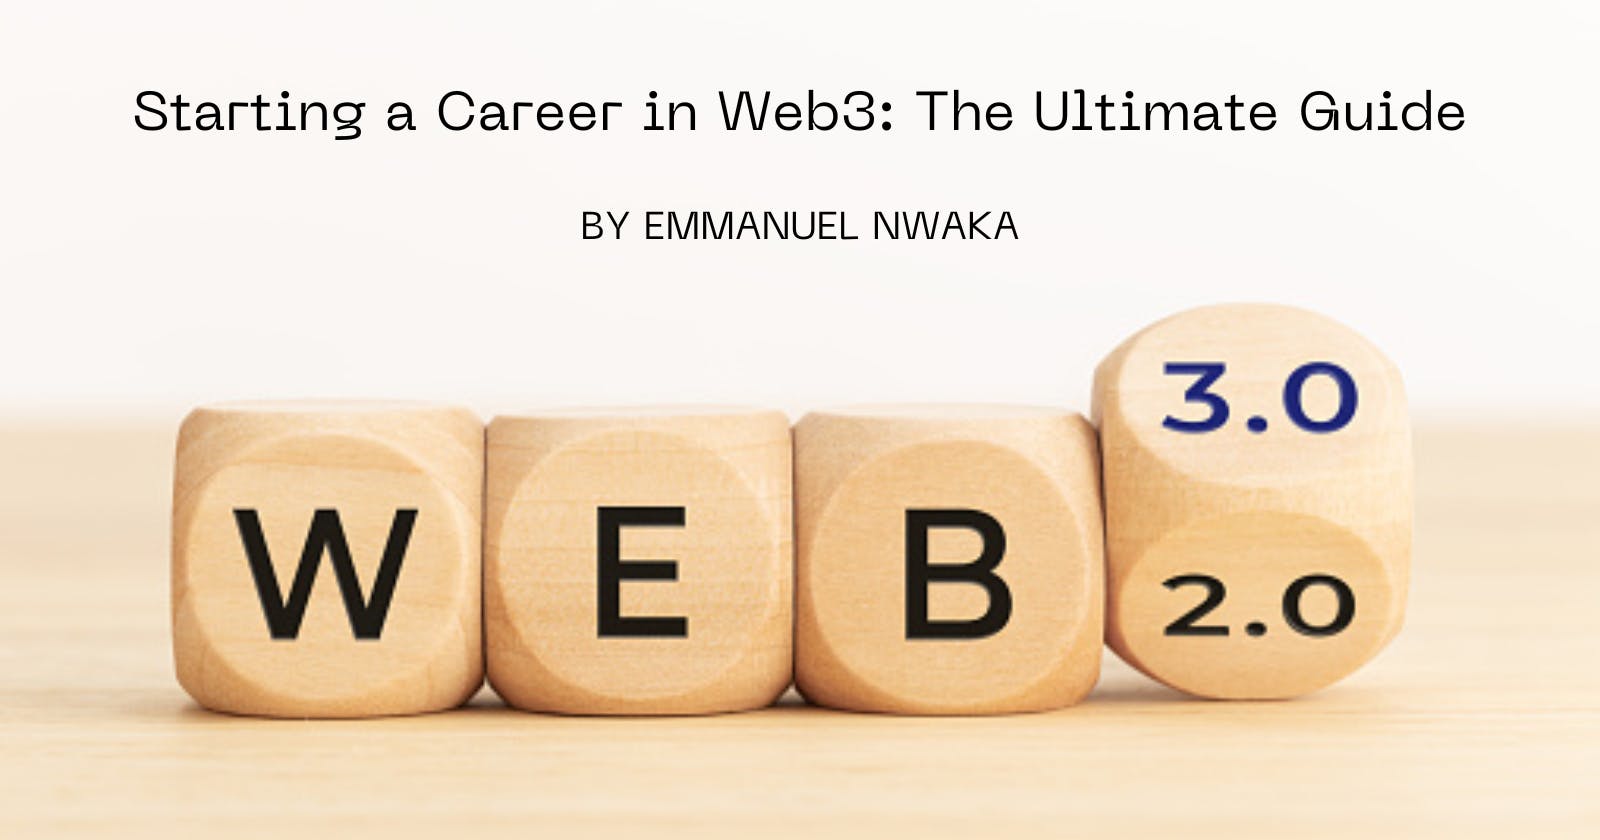 Starting a Career in Web3: The Ultimate Guide